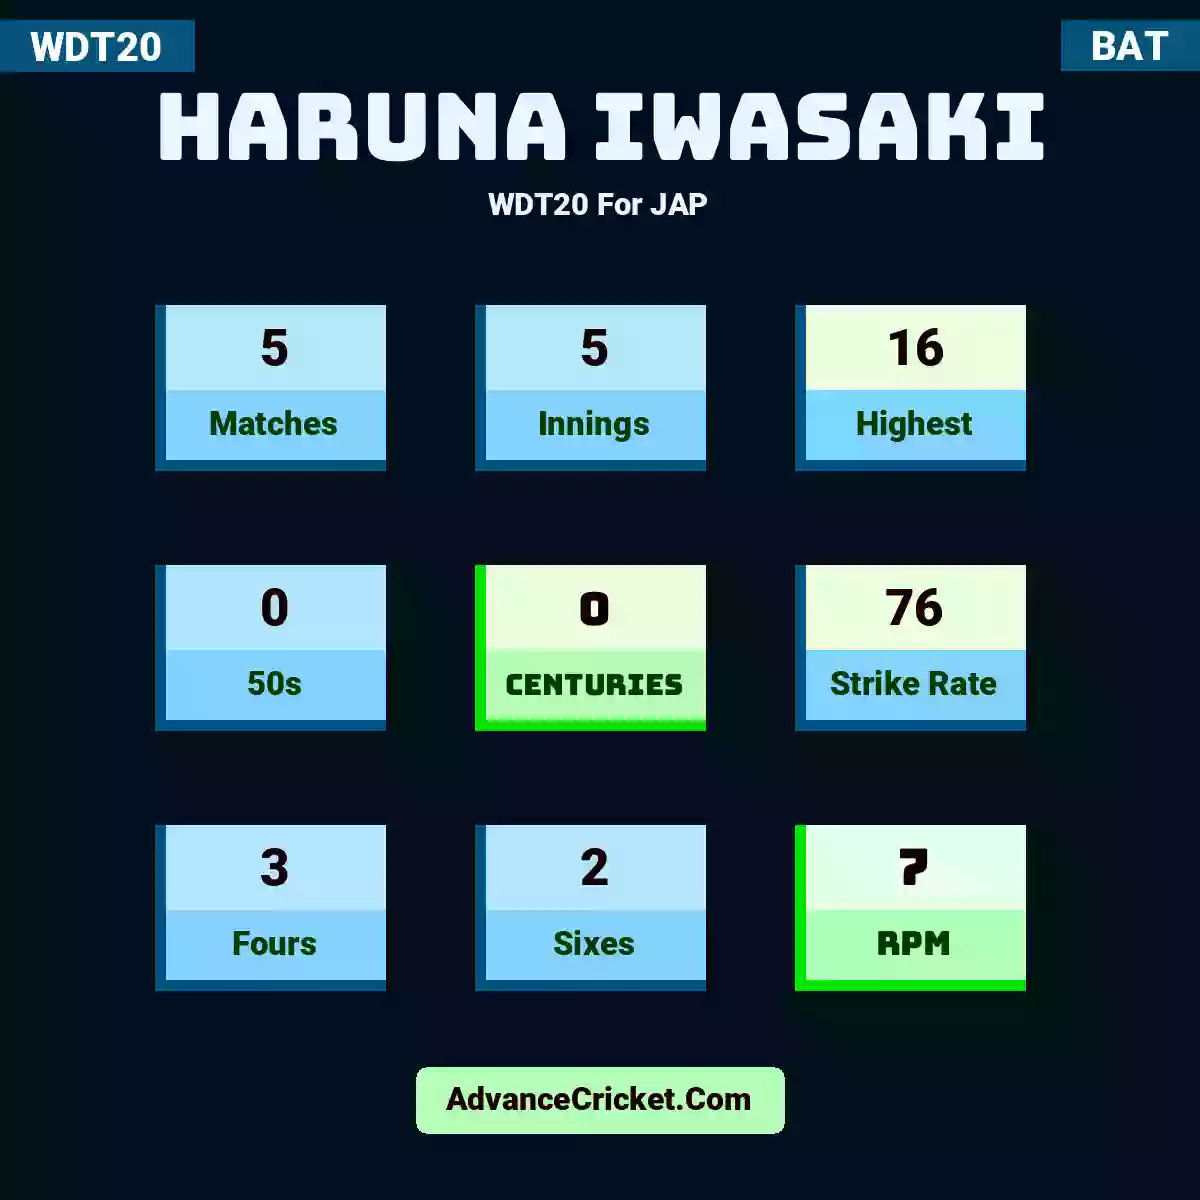 Haruna Iwasaki WDT20  For JAP, Haruna Iwasaki played 5 matches, scored 16 runs as highest, 0 half-centuries, and 0 centuries, with a strike rate of 76. H.Iwasaki hit 3 fours and 2 sixes, with an RPM of 7.